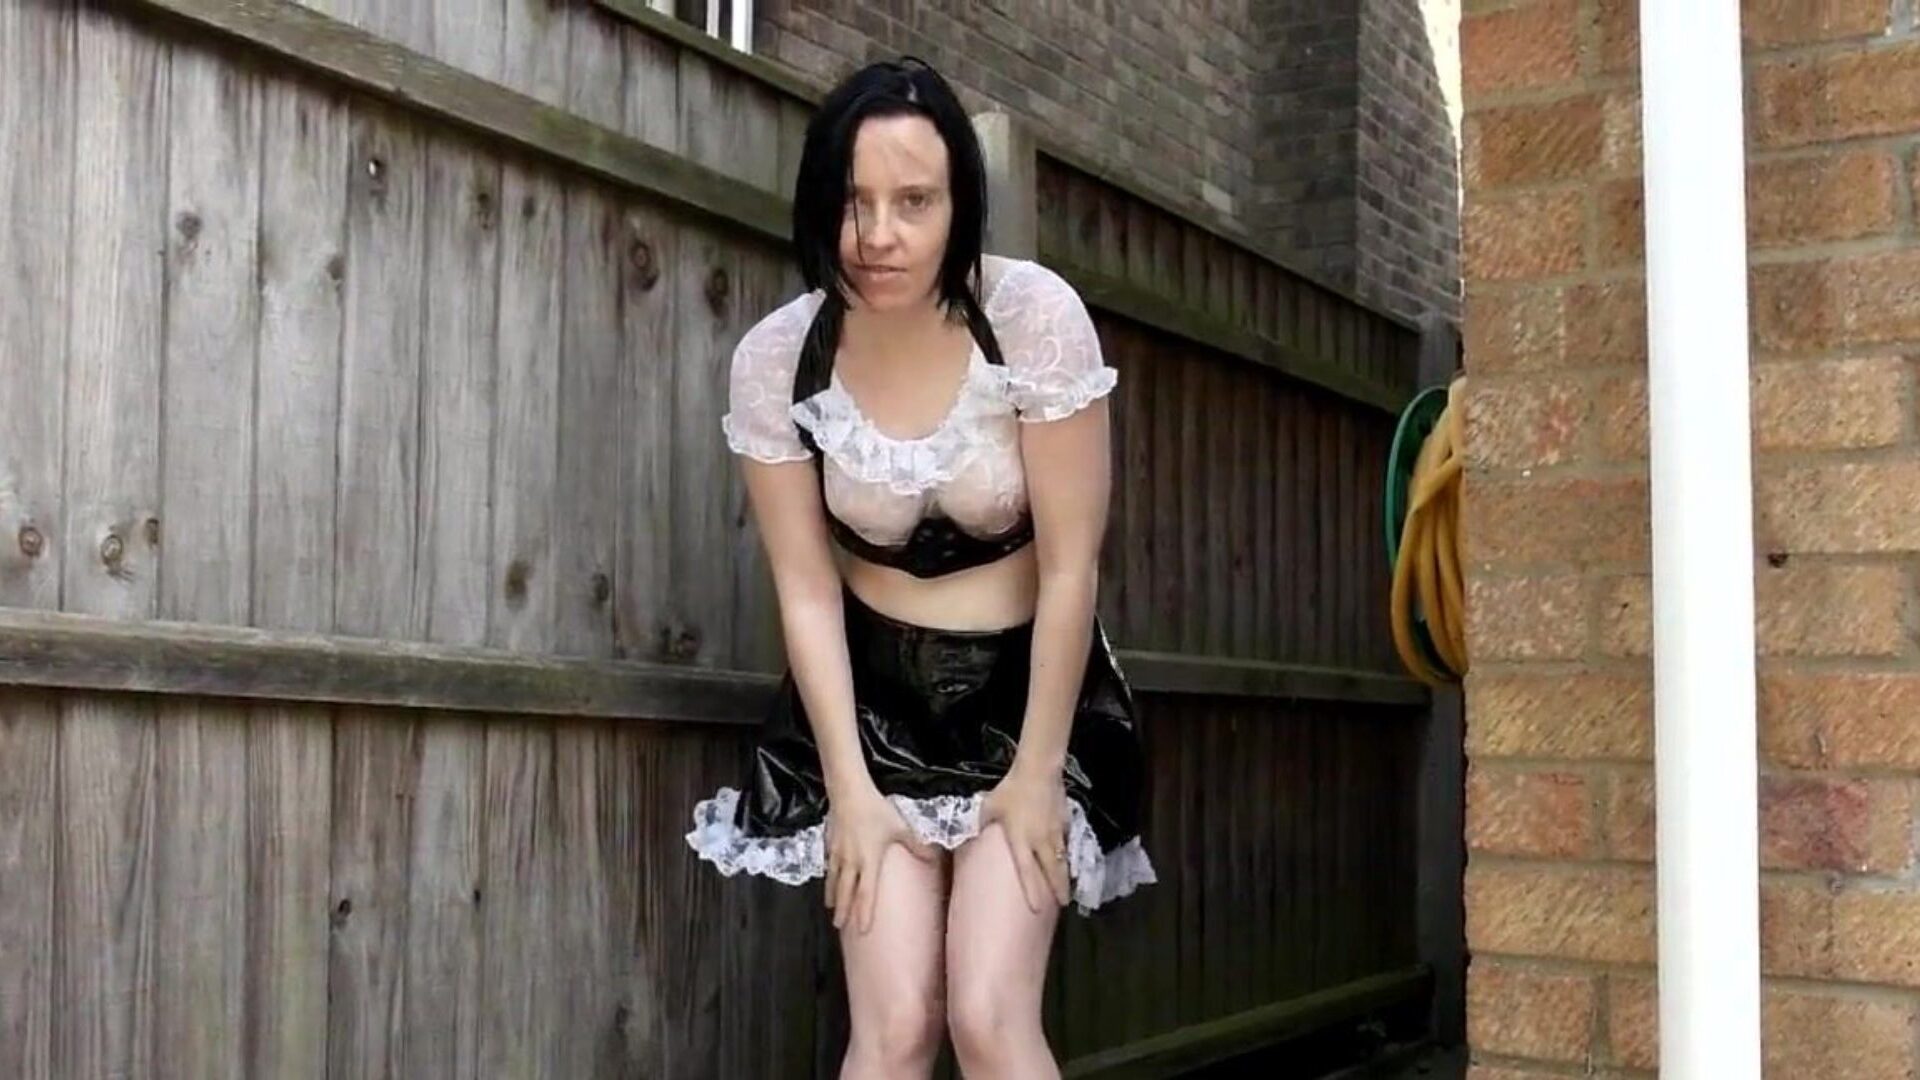 Pvc French Maid Uniform Outdoors, Free HD Porn 63: xHamster Watch Pvc French Maid Uniform Outdoors movie on xHamster, the hottest HD fuck-a-thon tube web site with tons of free-for-all British French Mobile & French Xxx porn clips